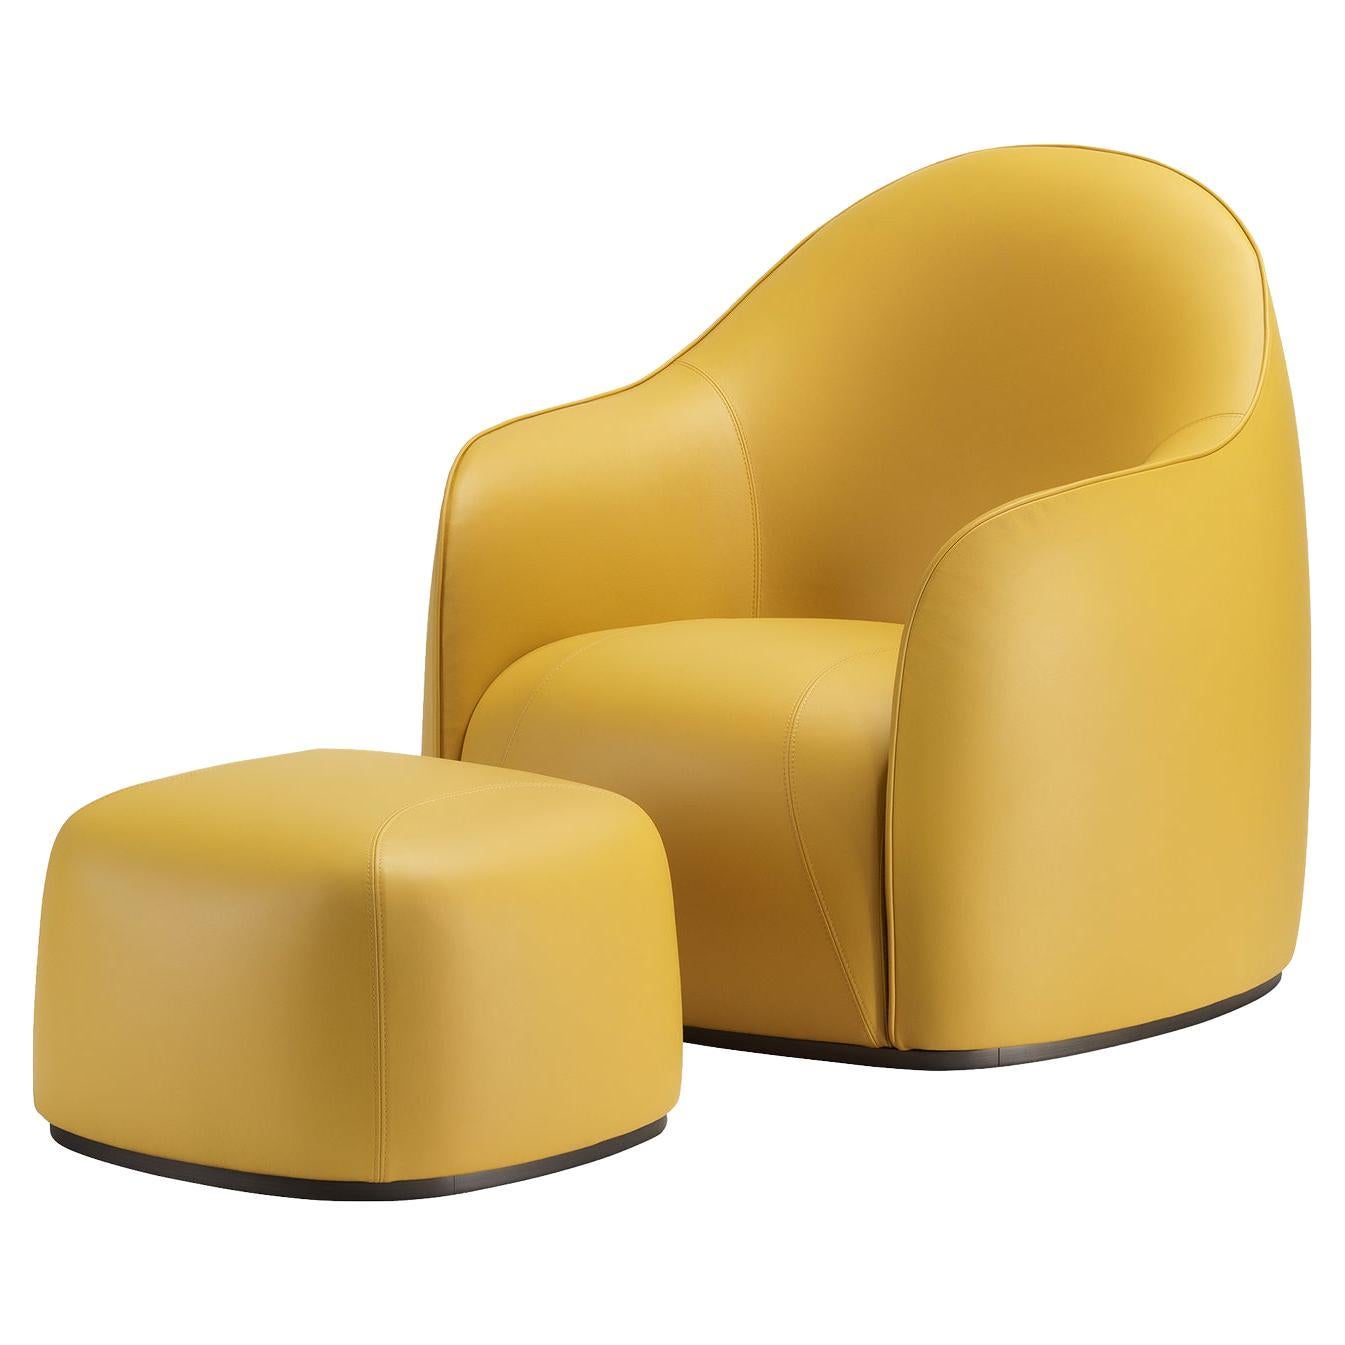 Sweet Set of Mustard Armchair and Pouf by Elisa Giovannoni For Sale